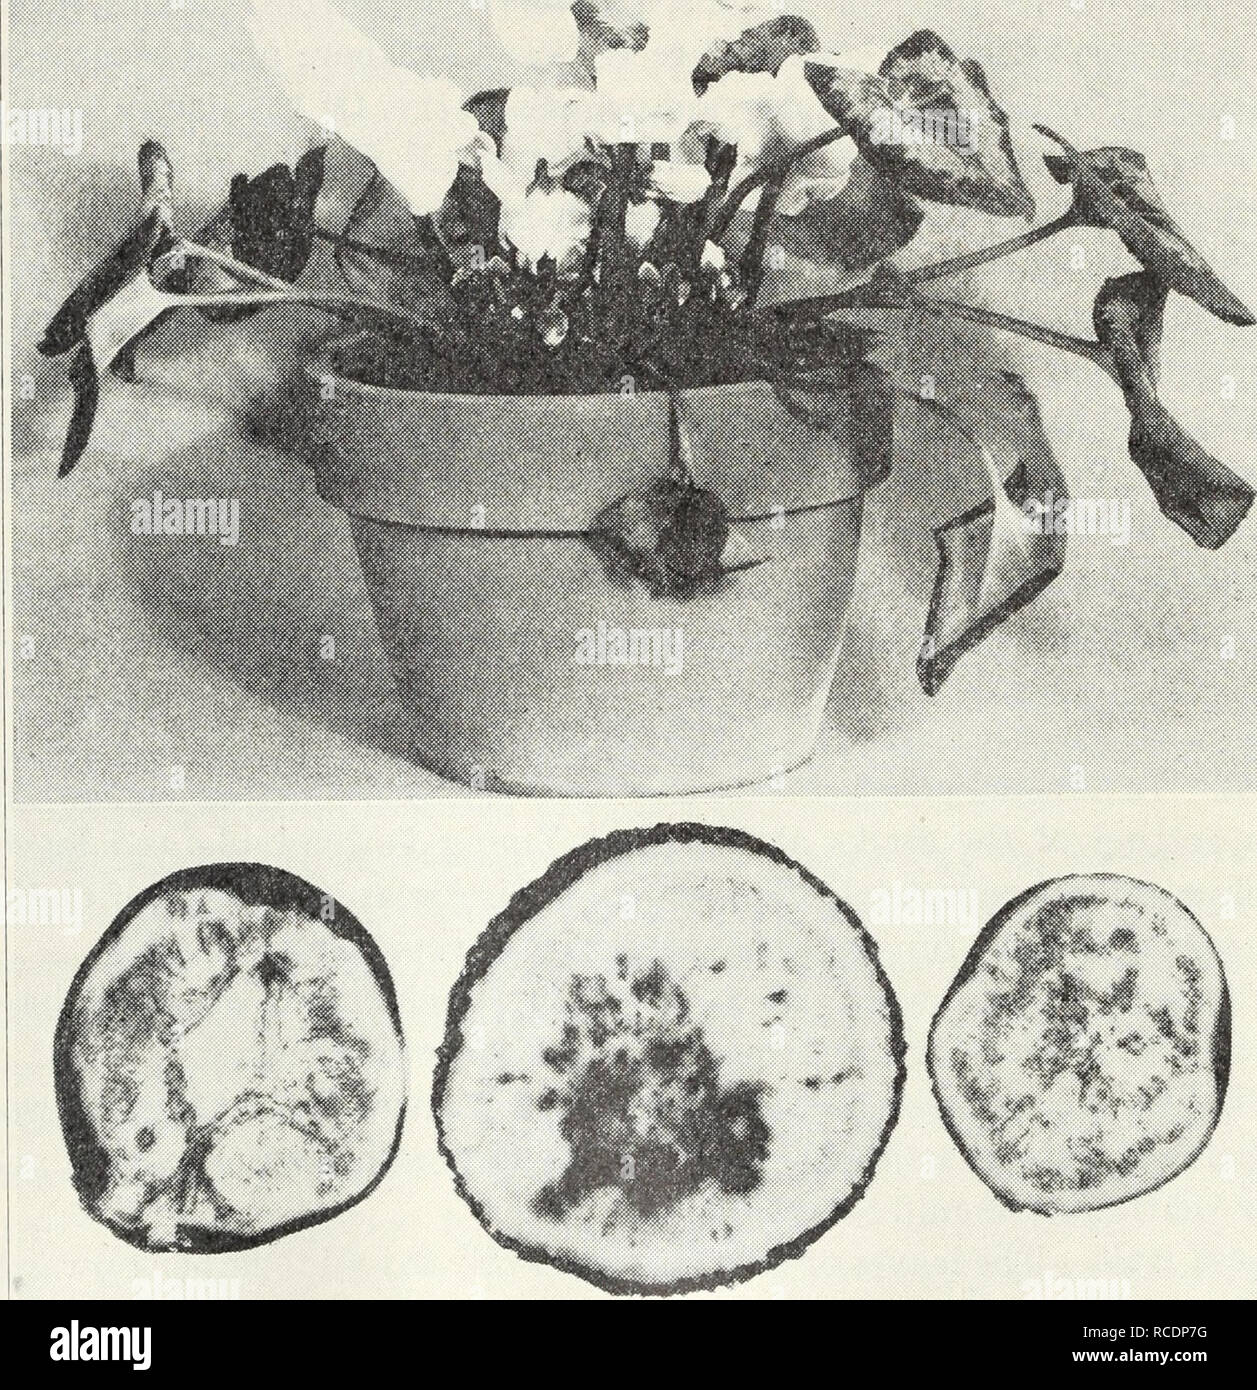 . Diseases of flowers and other ornamentals. Flowers; Plant diseases. 20 California Agricultural Extension Service LCir- 118 on cutting into the top of the tuber where the leaves and flower stalks are attached. This disease has been attributed to the fungus Cladosporium cyclaminis, but there is some doubt as to the correctness of this. To control, use fresh soil for seedbed and potting, and grow the plants at as low temperatures as possible.. Fig. 5.—Cyclamen stunt; note the shortening of flower stalks and discoloration in corms. CYPRESS, MONTEREY AND ITALIAN Bark Canker, Coryneum Canker.—Twig Stock Photo